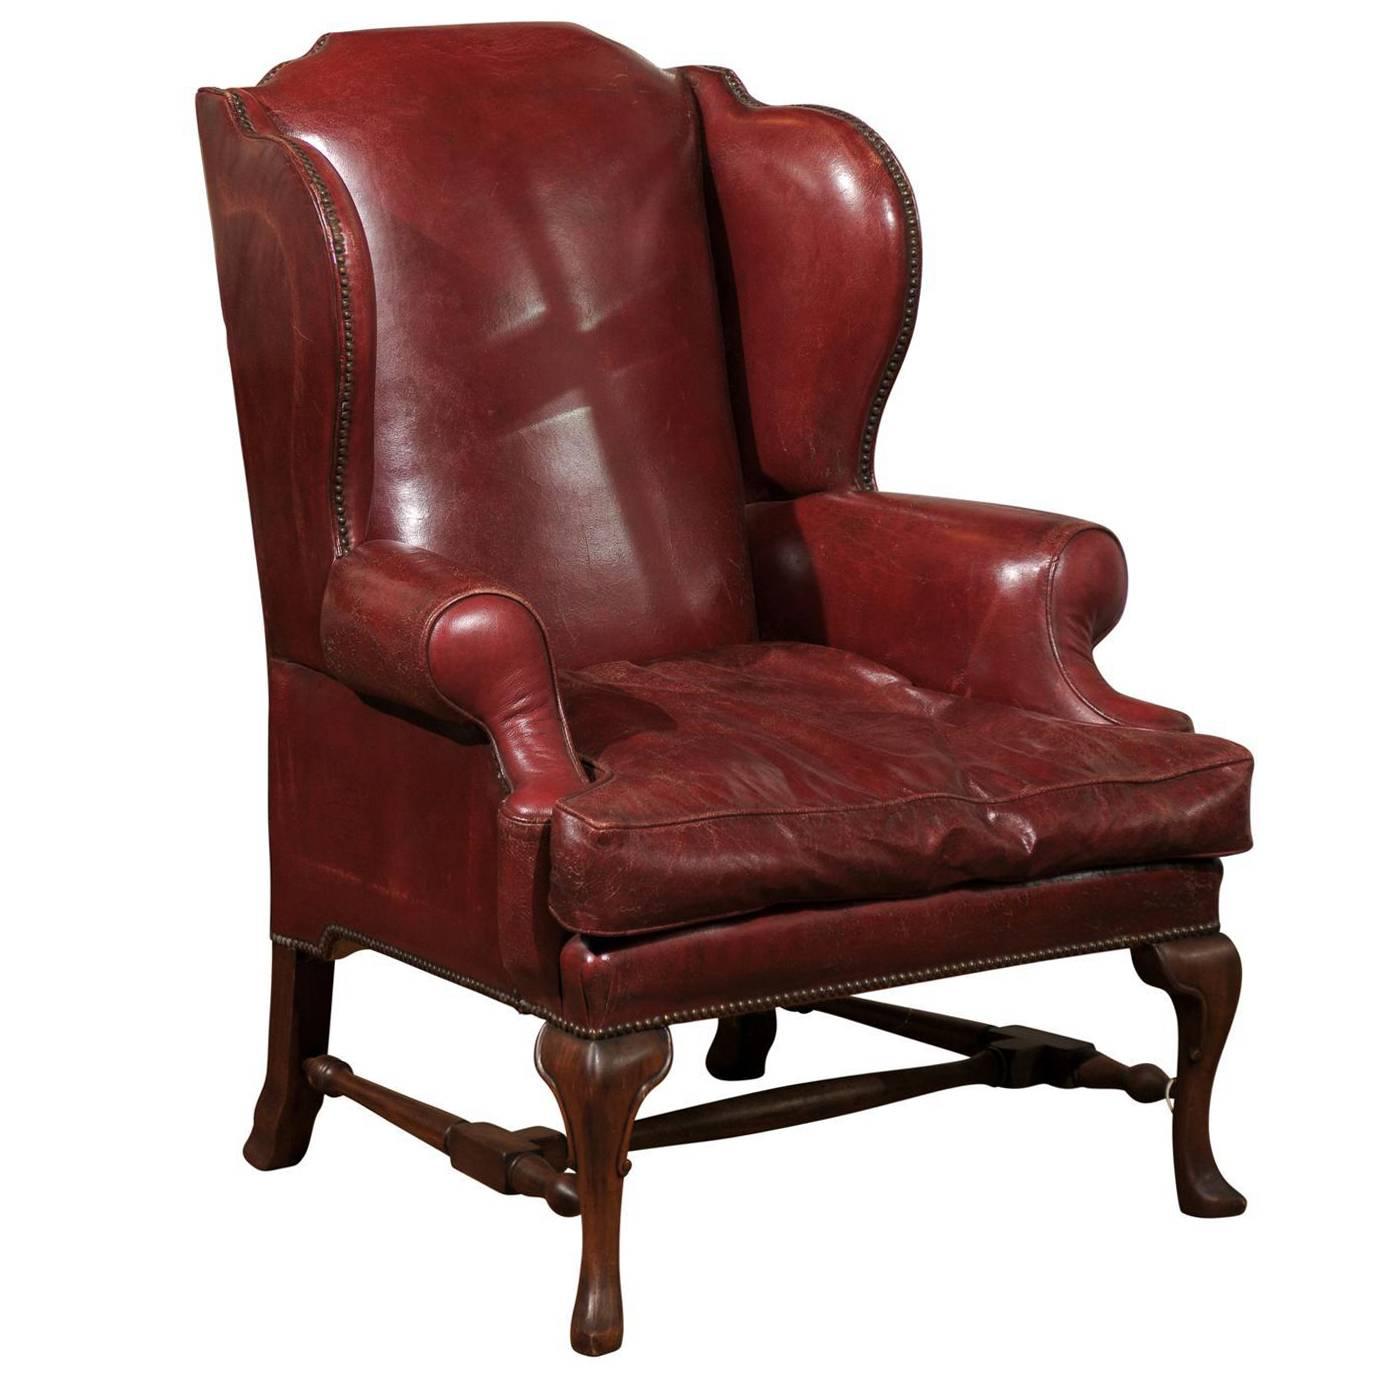 Late 19th Century English Wingback Chair